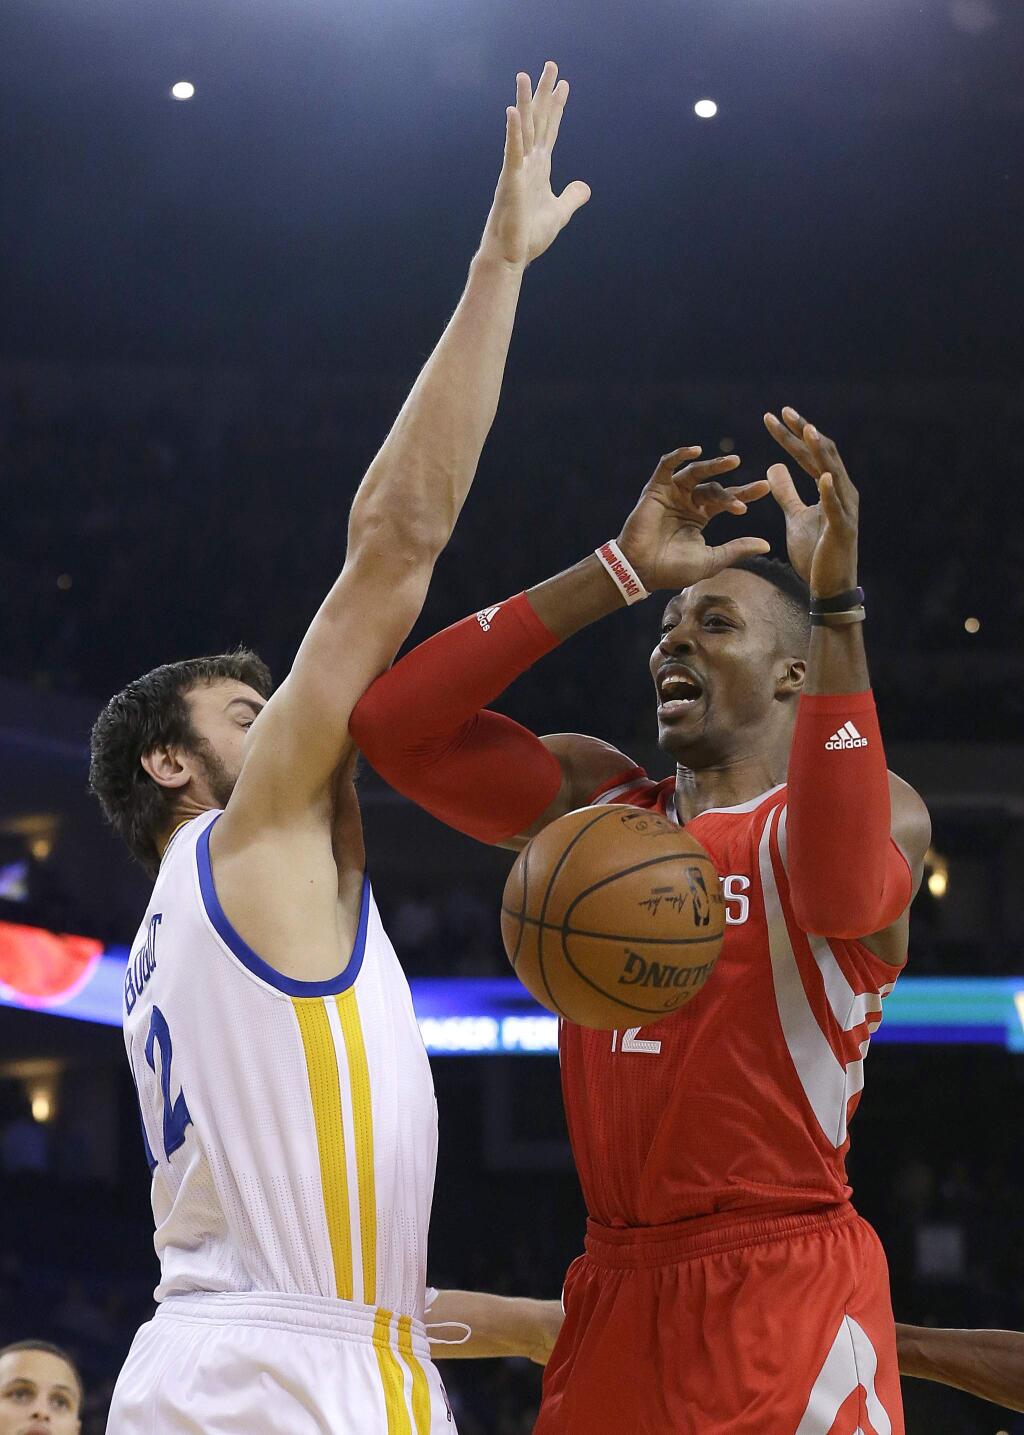 Houston Rockets center Dwight Howard, right, loses the ball as he is guarded by Golden State Warriors center Andrew Bogut during the first half of an NBA basketball game in Oakland, Calif., Wednesday, Jan. 21, 2015. (AP Photo/Jeff Chiu)